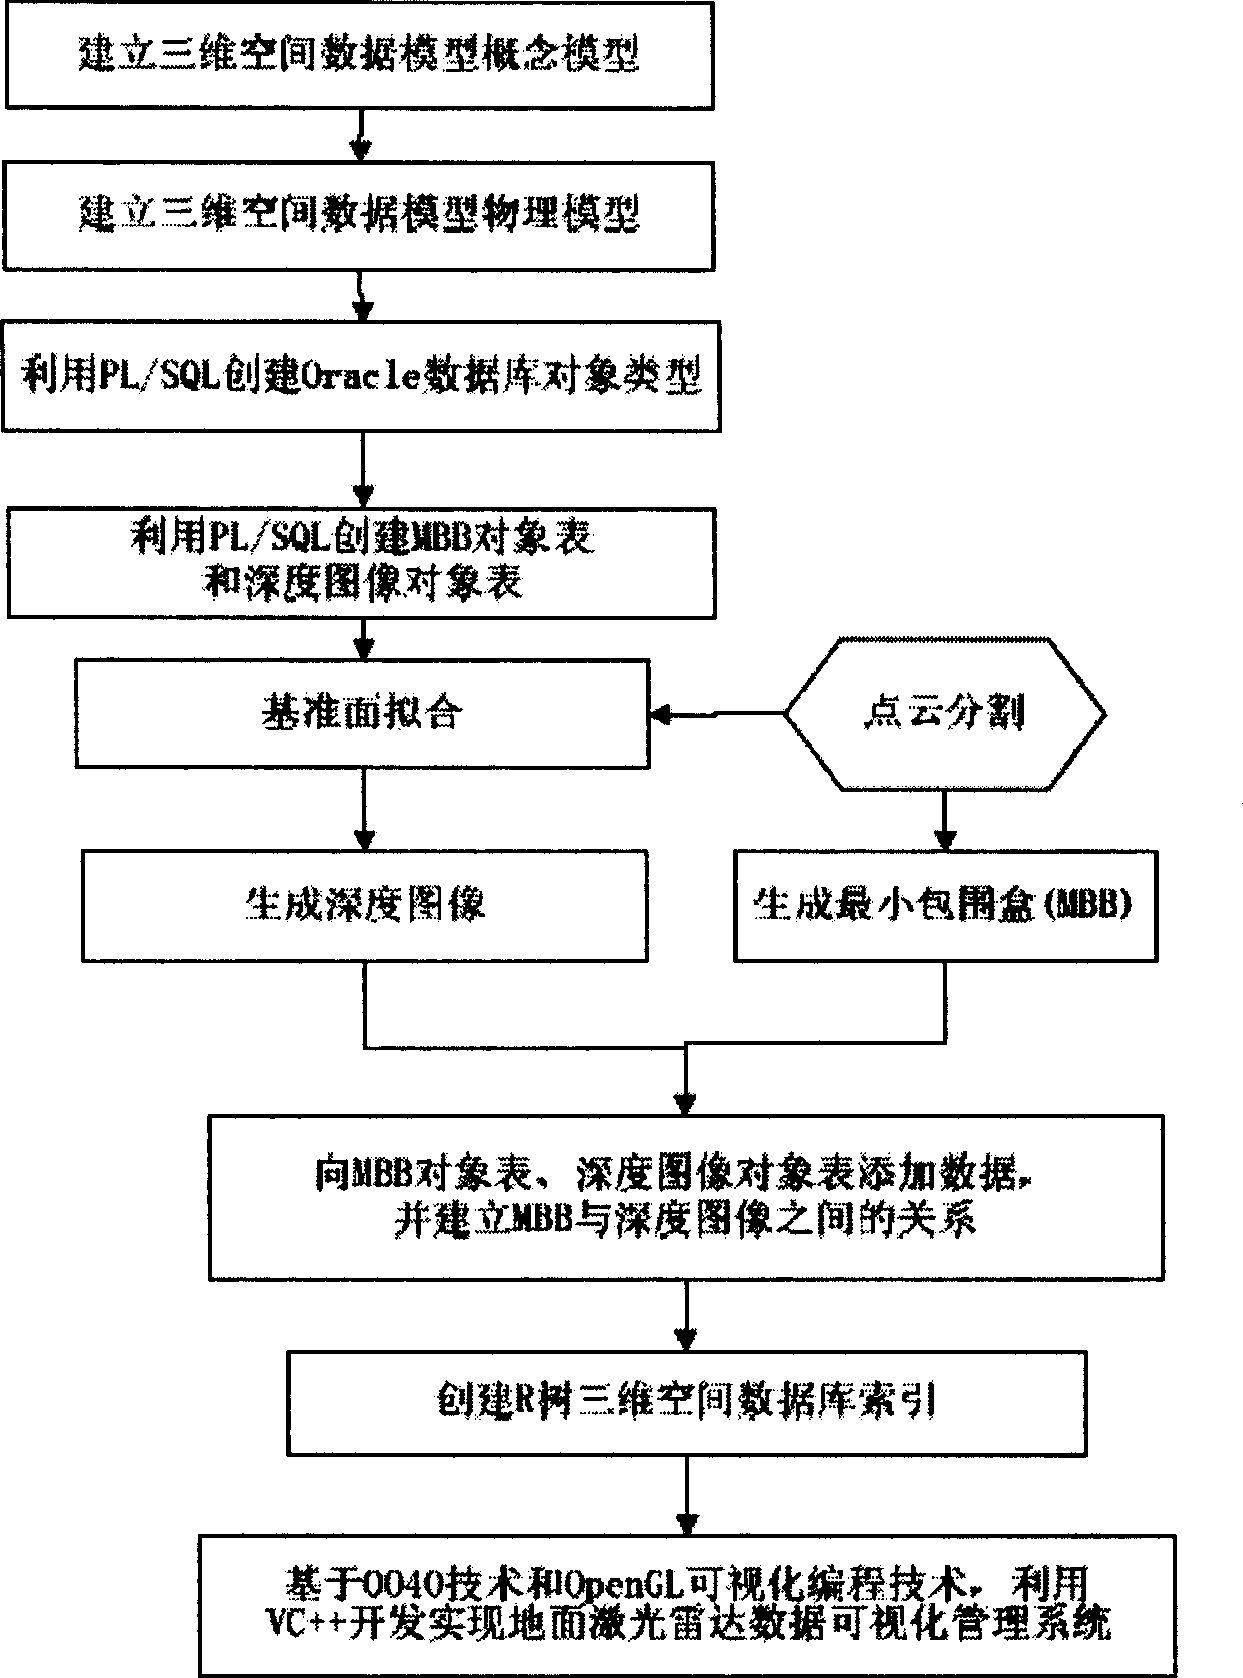 Range image-based 3D spatial data processing method and device